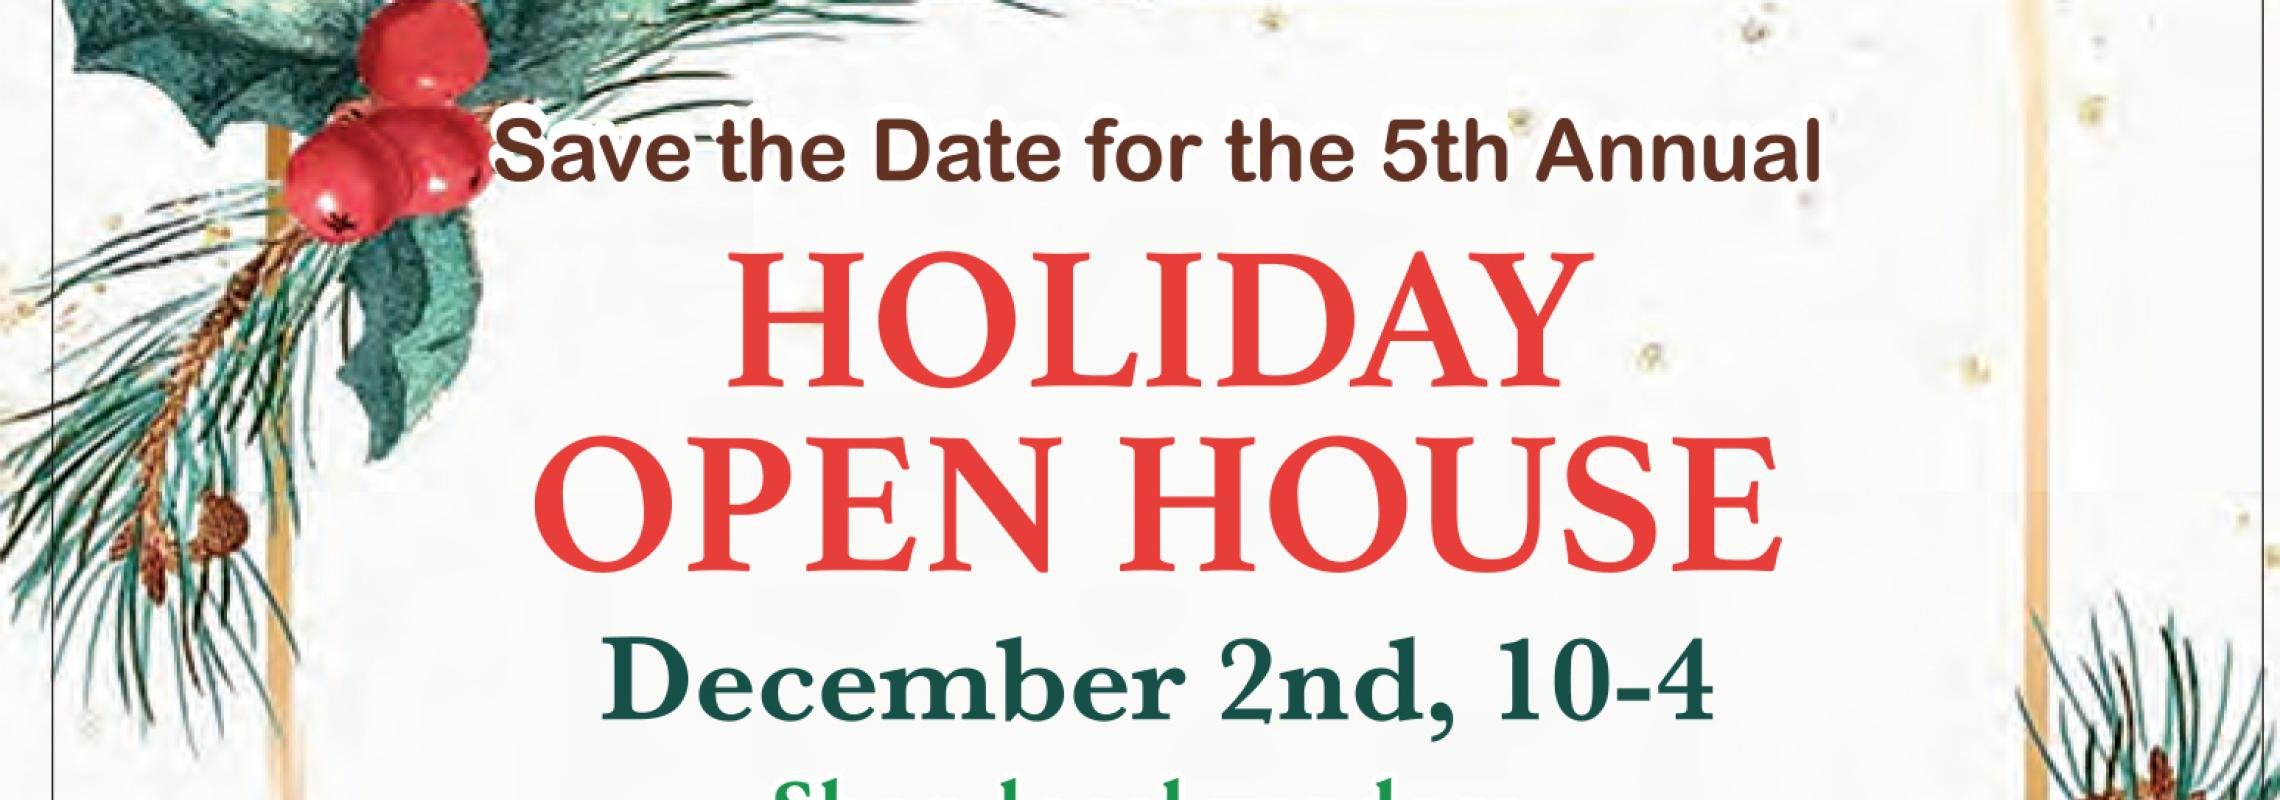 Holiday Open House at Center for Missouri Studies